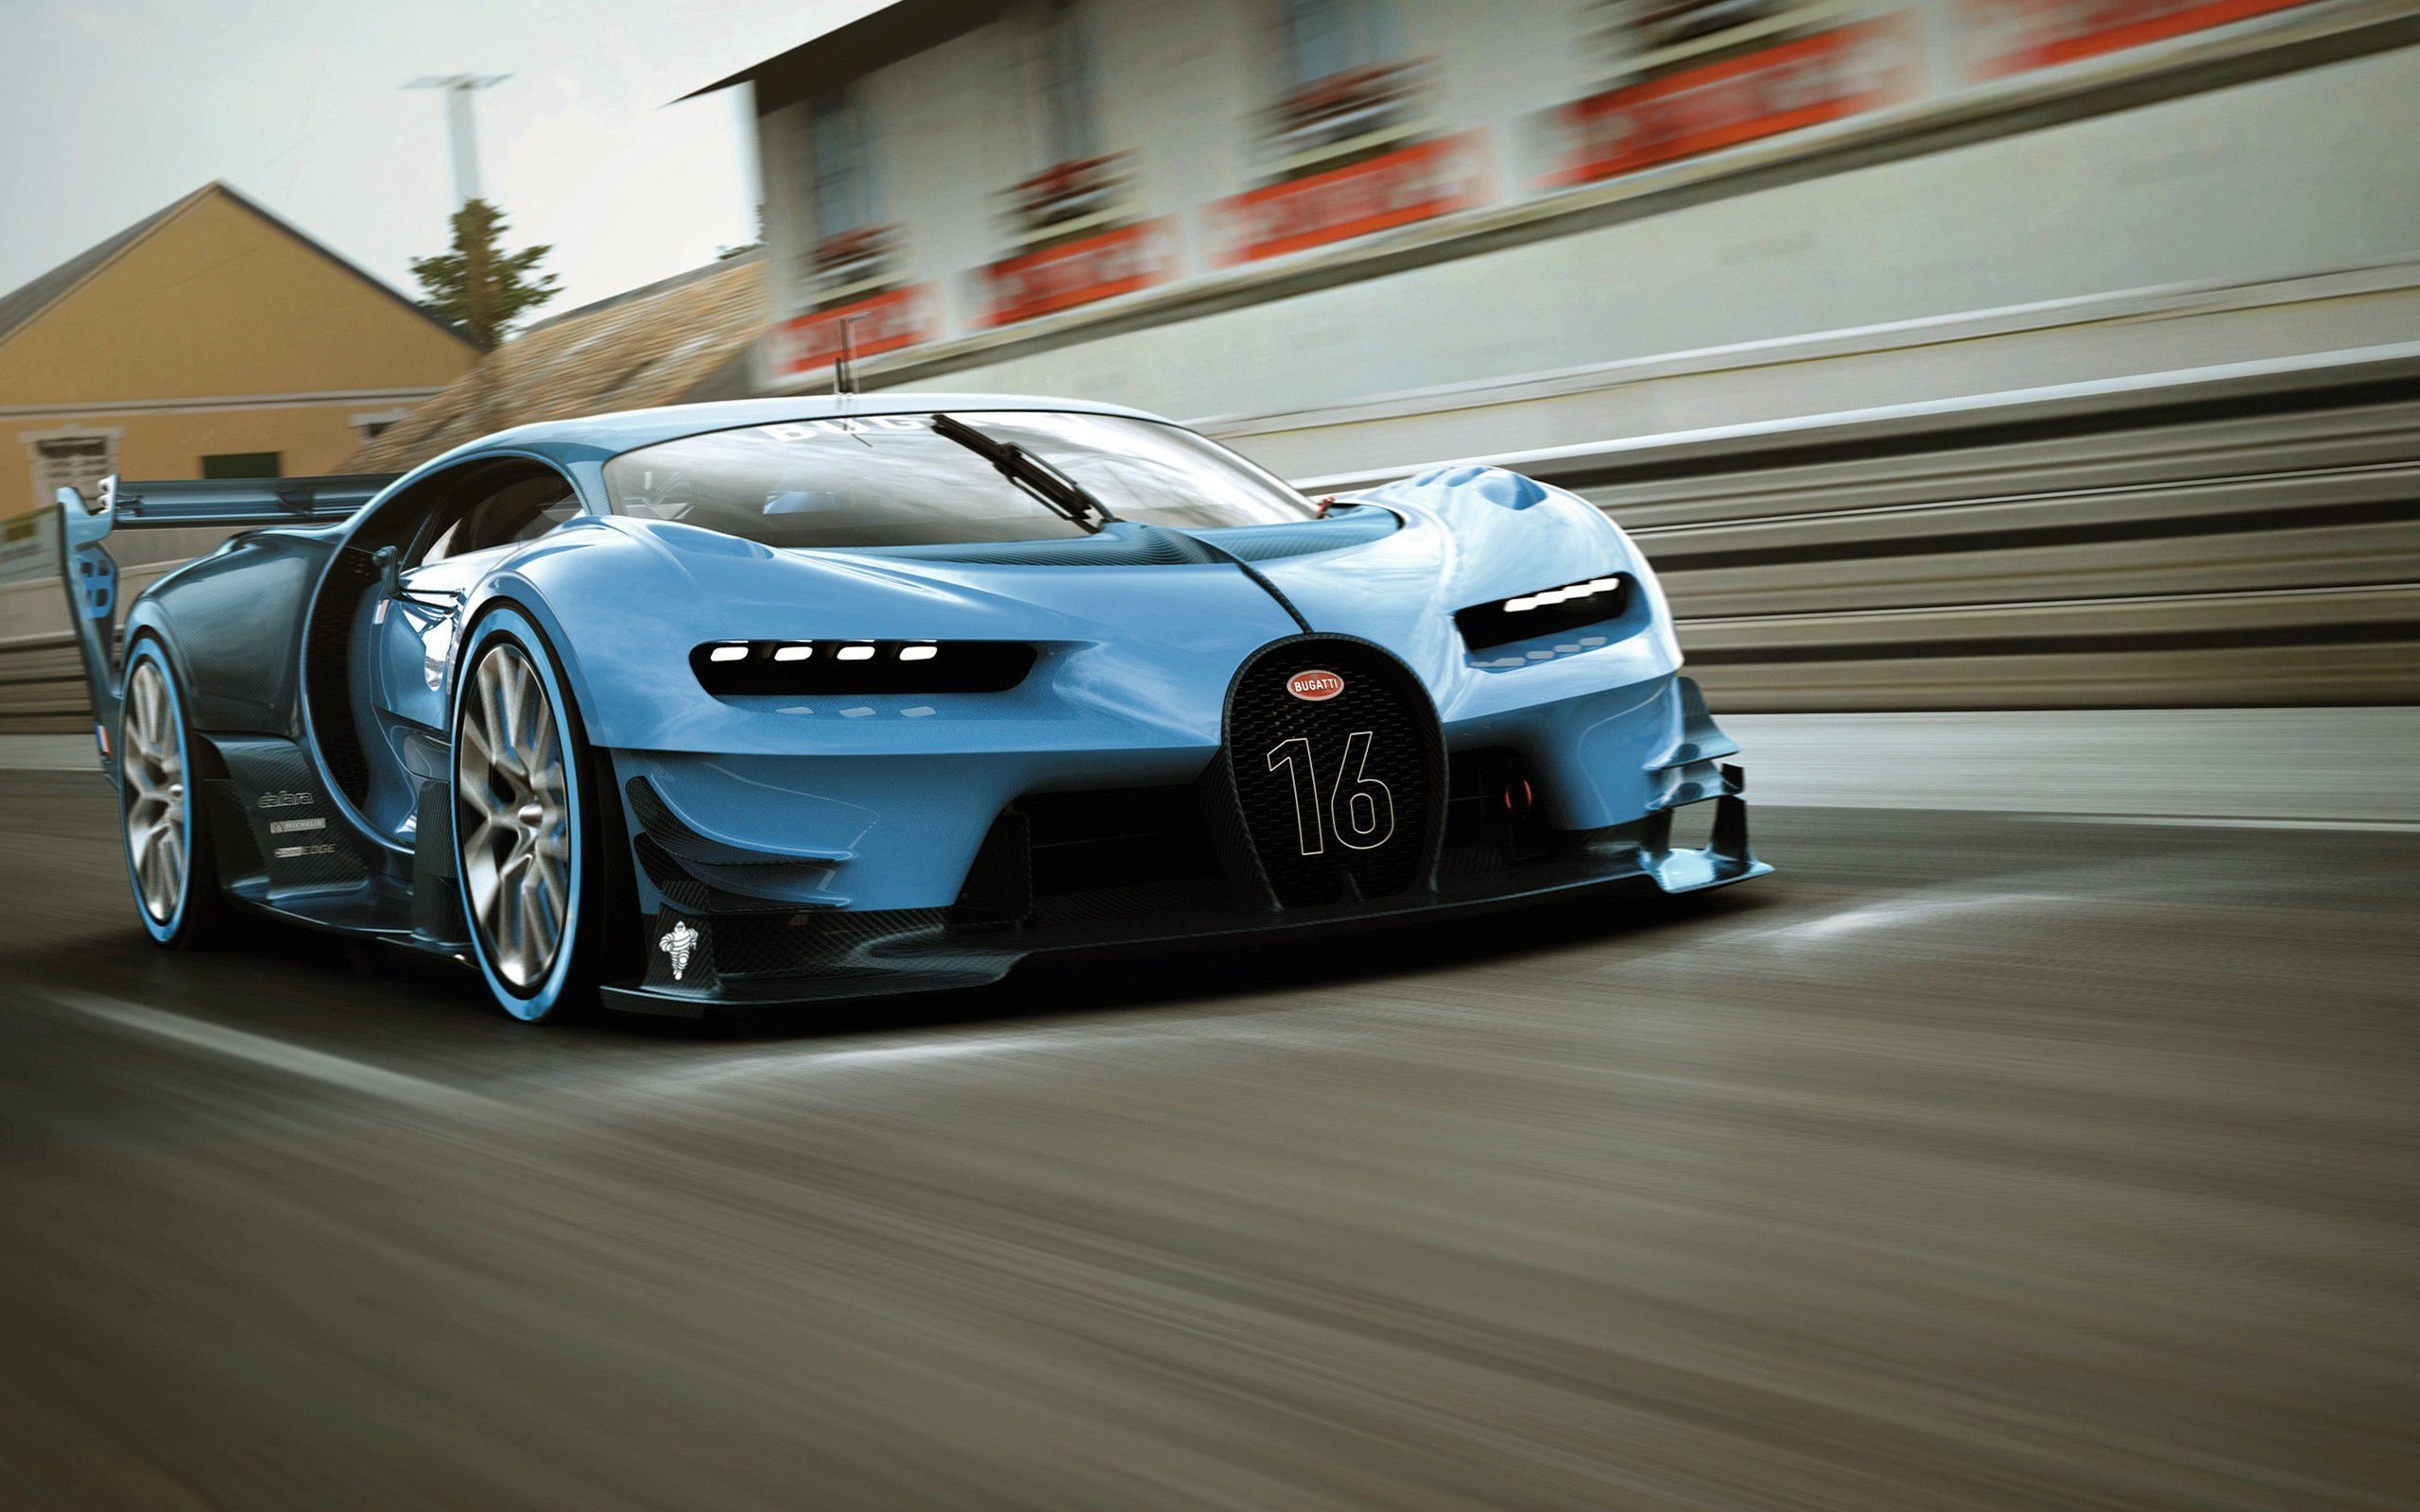 Sports Car: Equipped with spoilers and diffusers to improve stability and downforce. 2560x1600 HD Background.